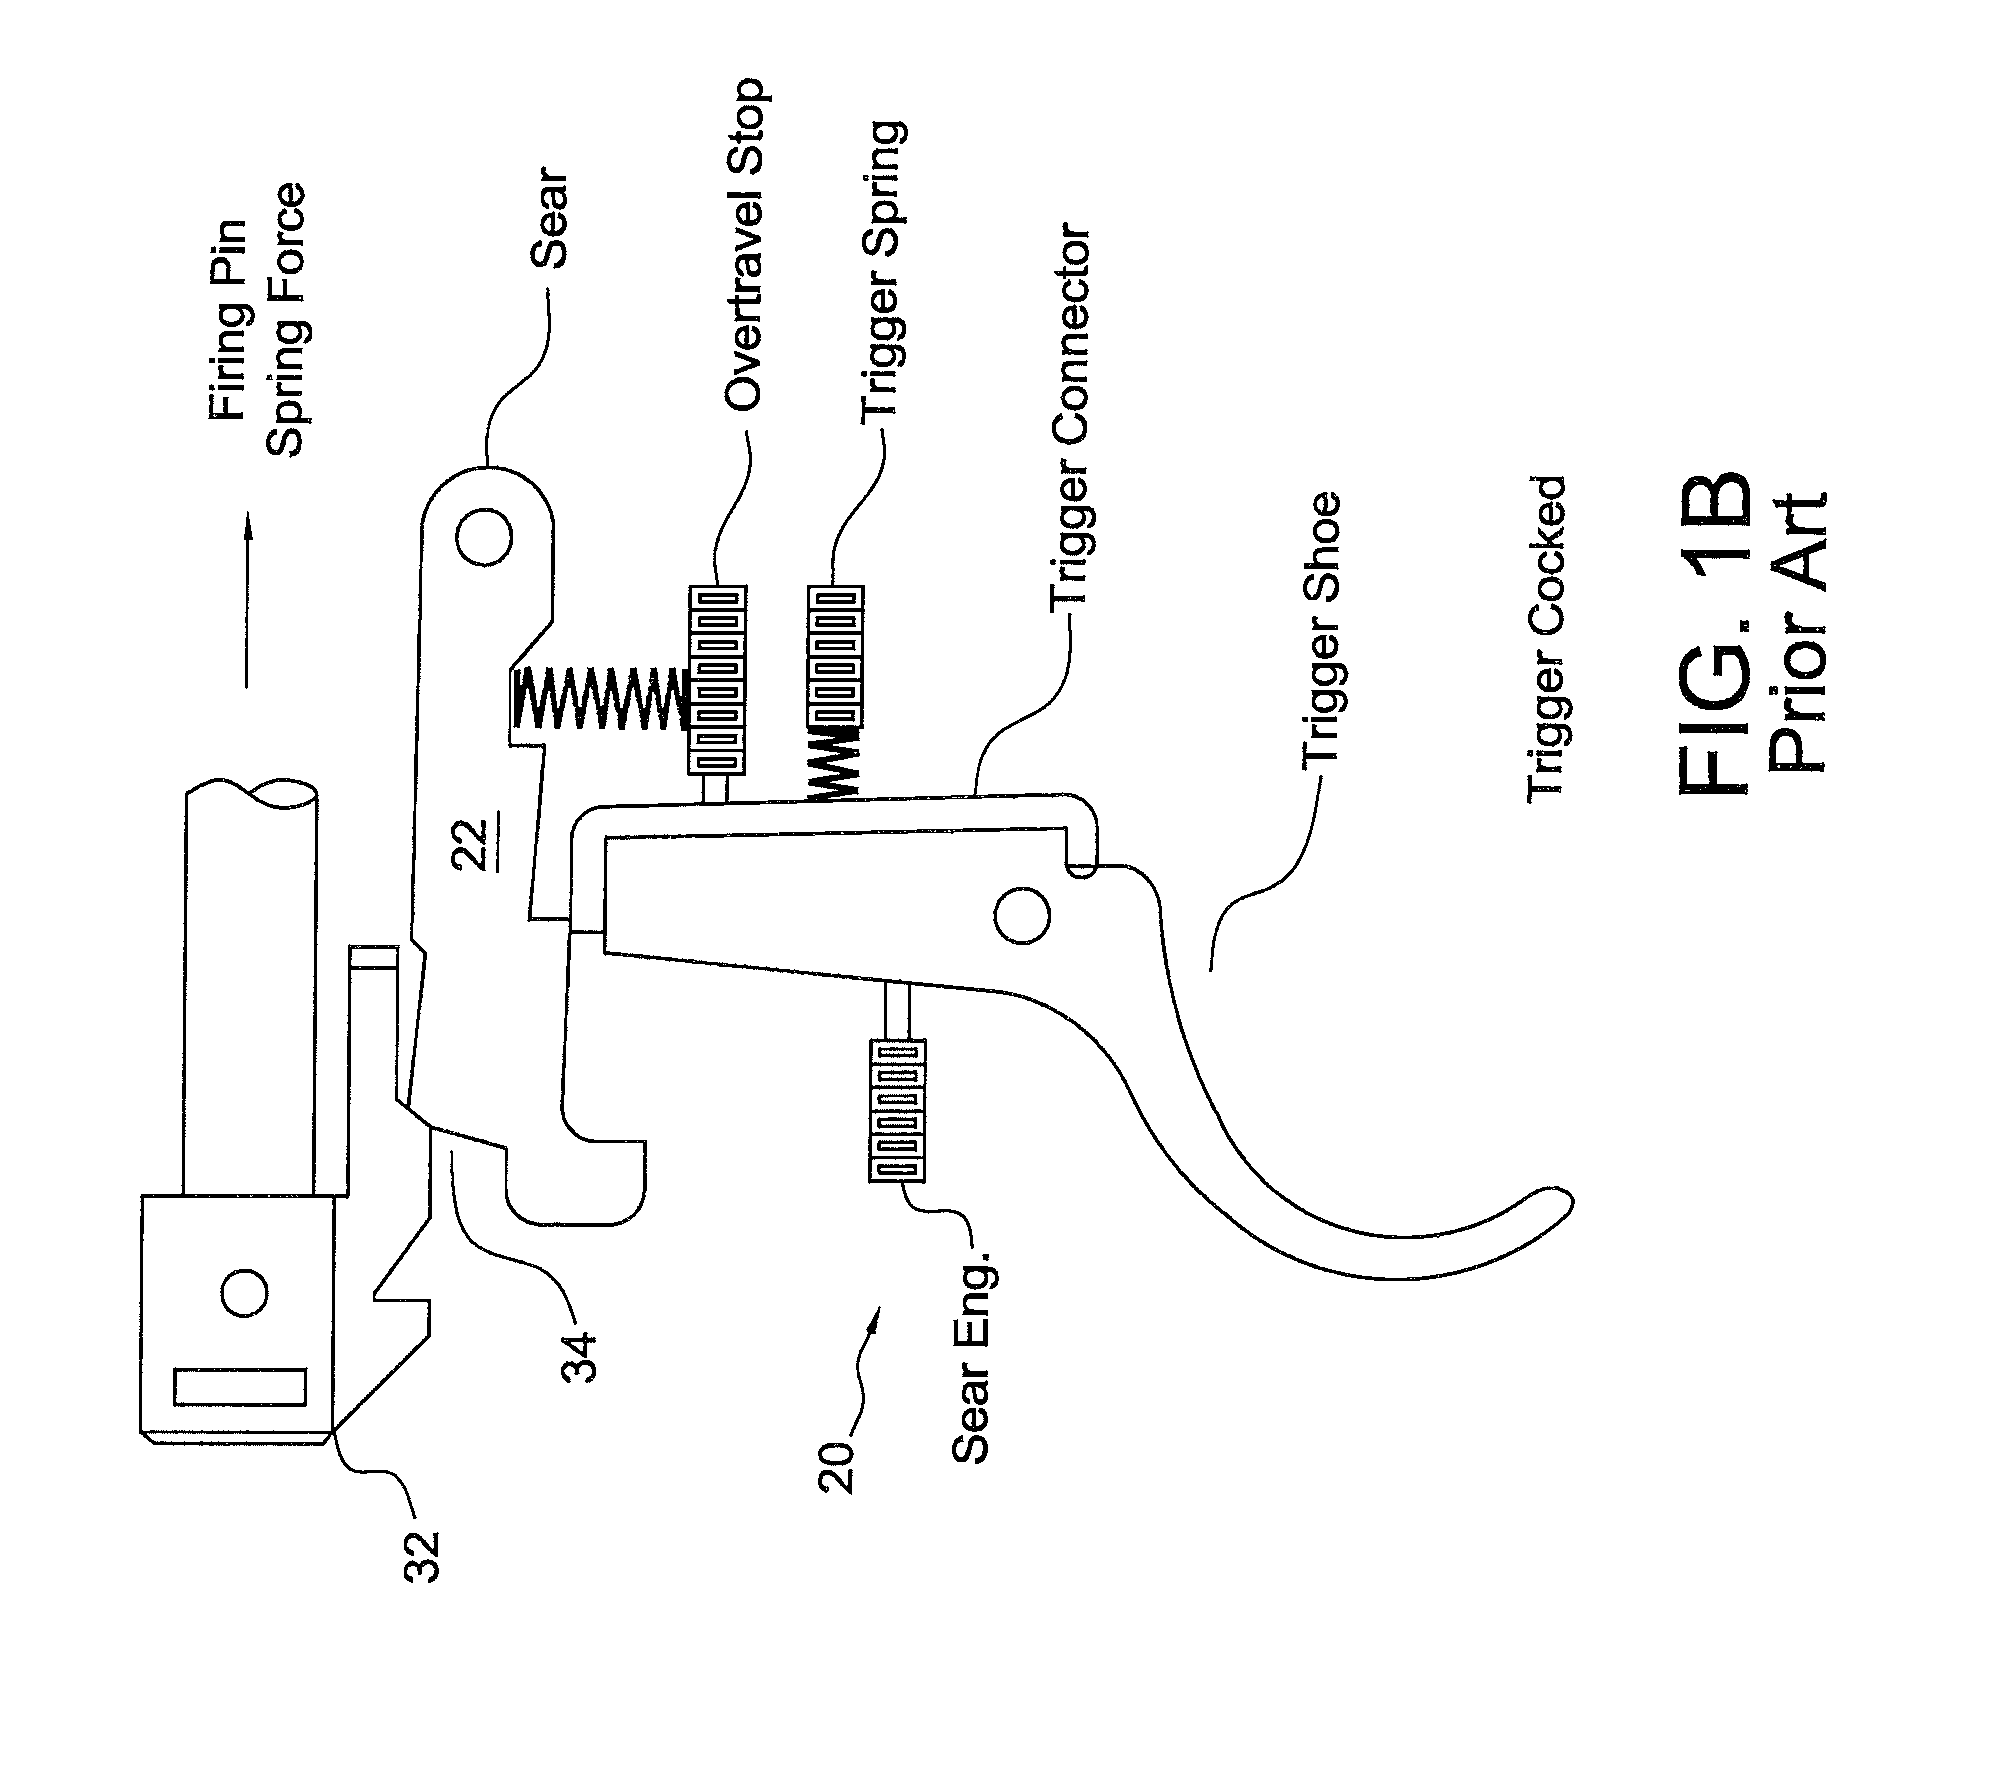 Drop-in adjustable trigger assembly with camming safety linkage